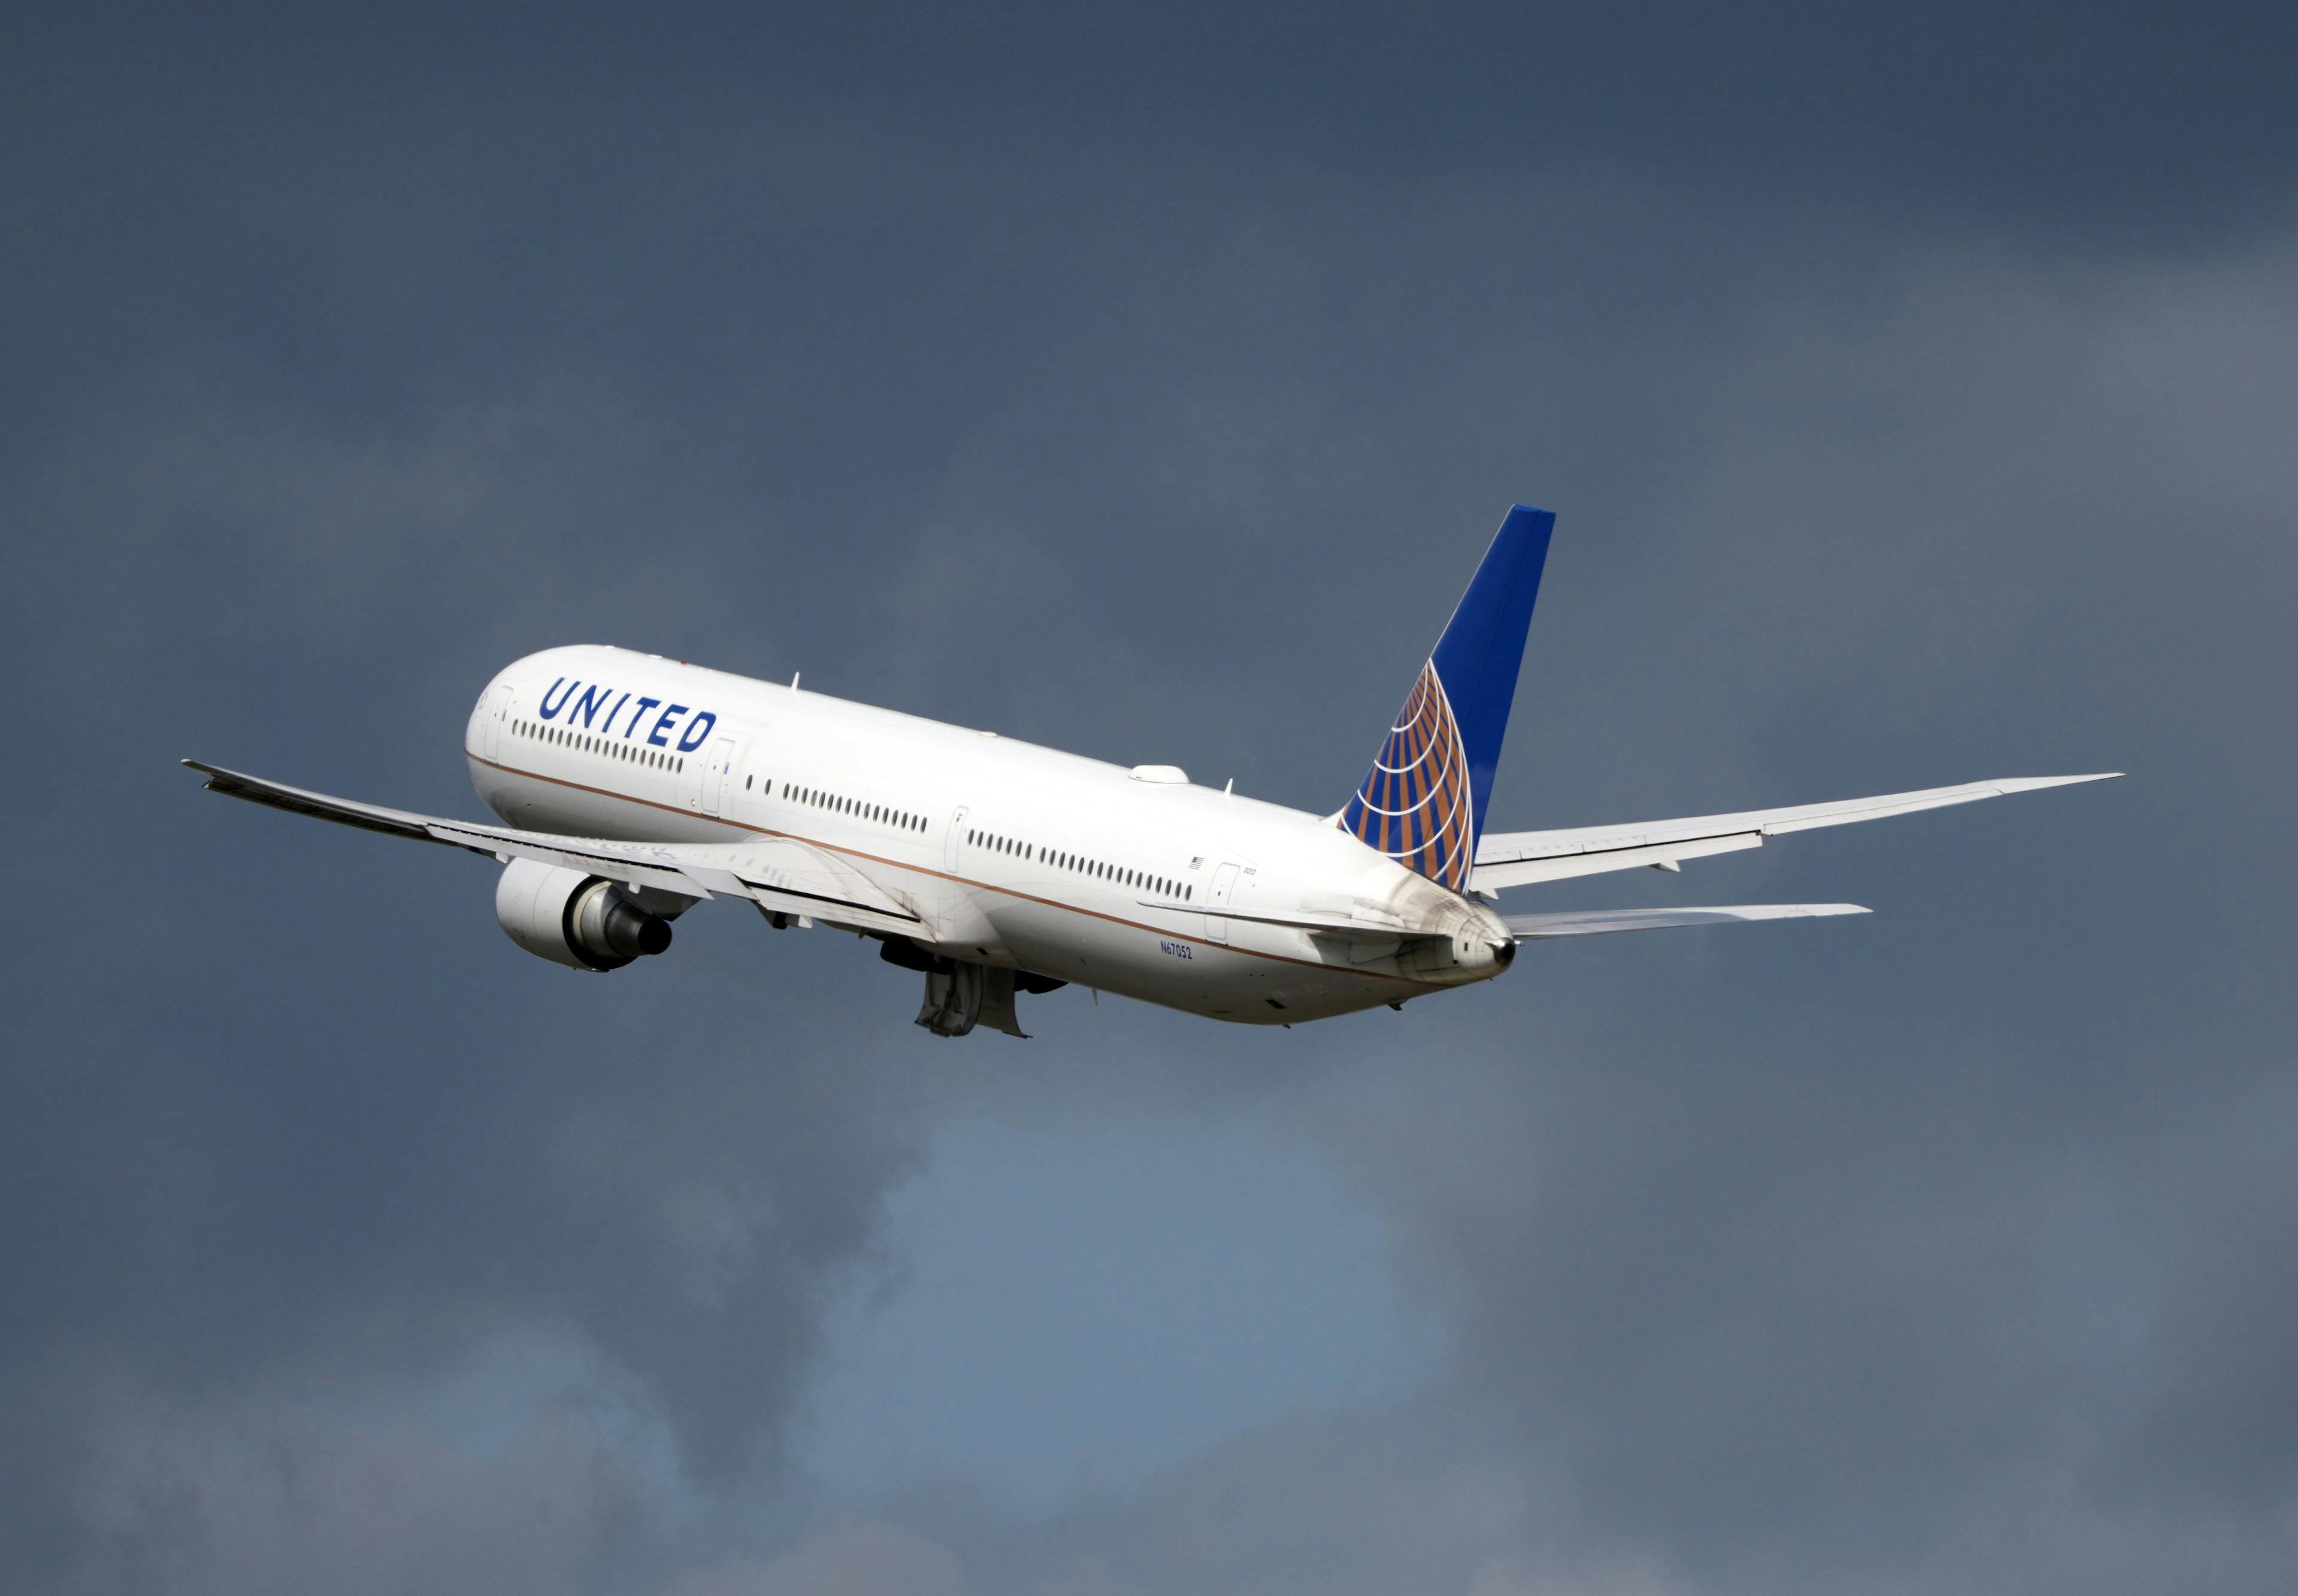 A United airline jet